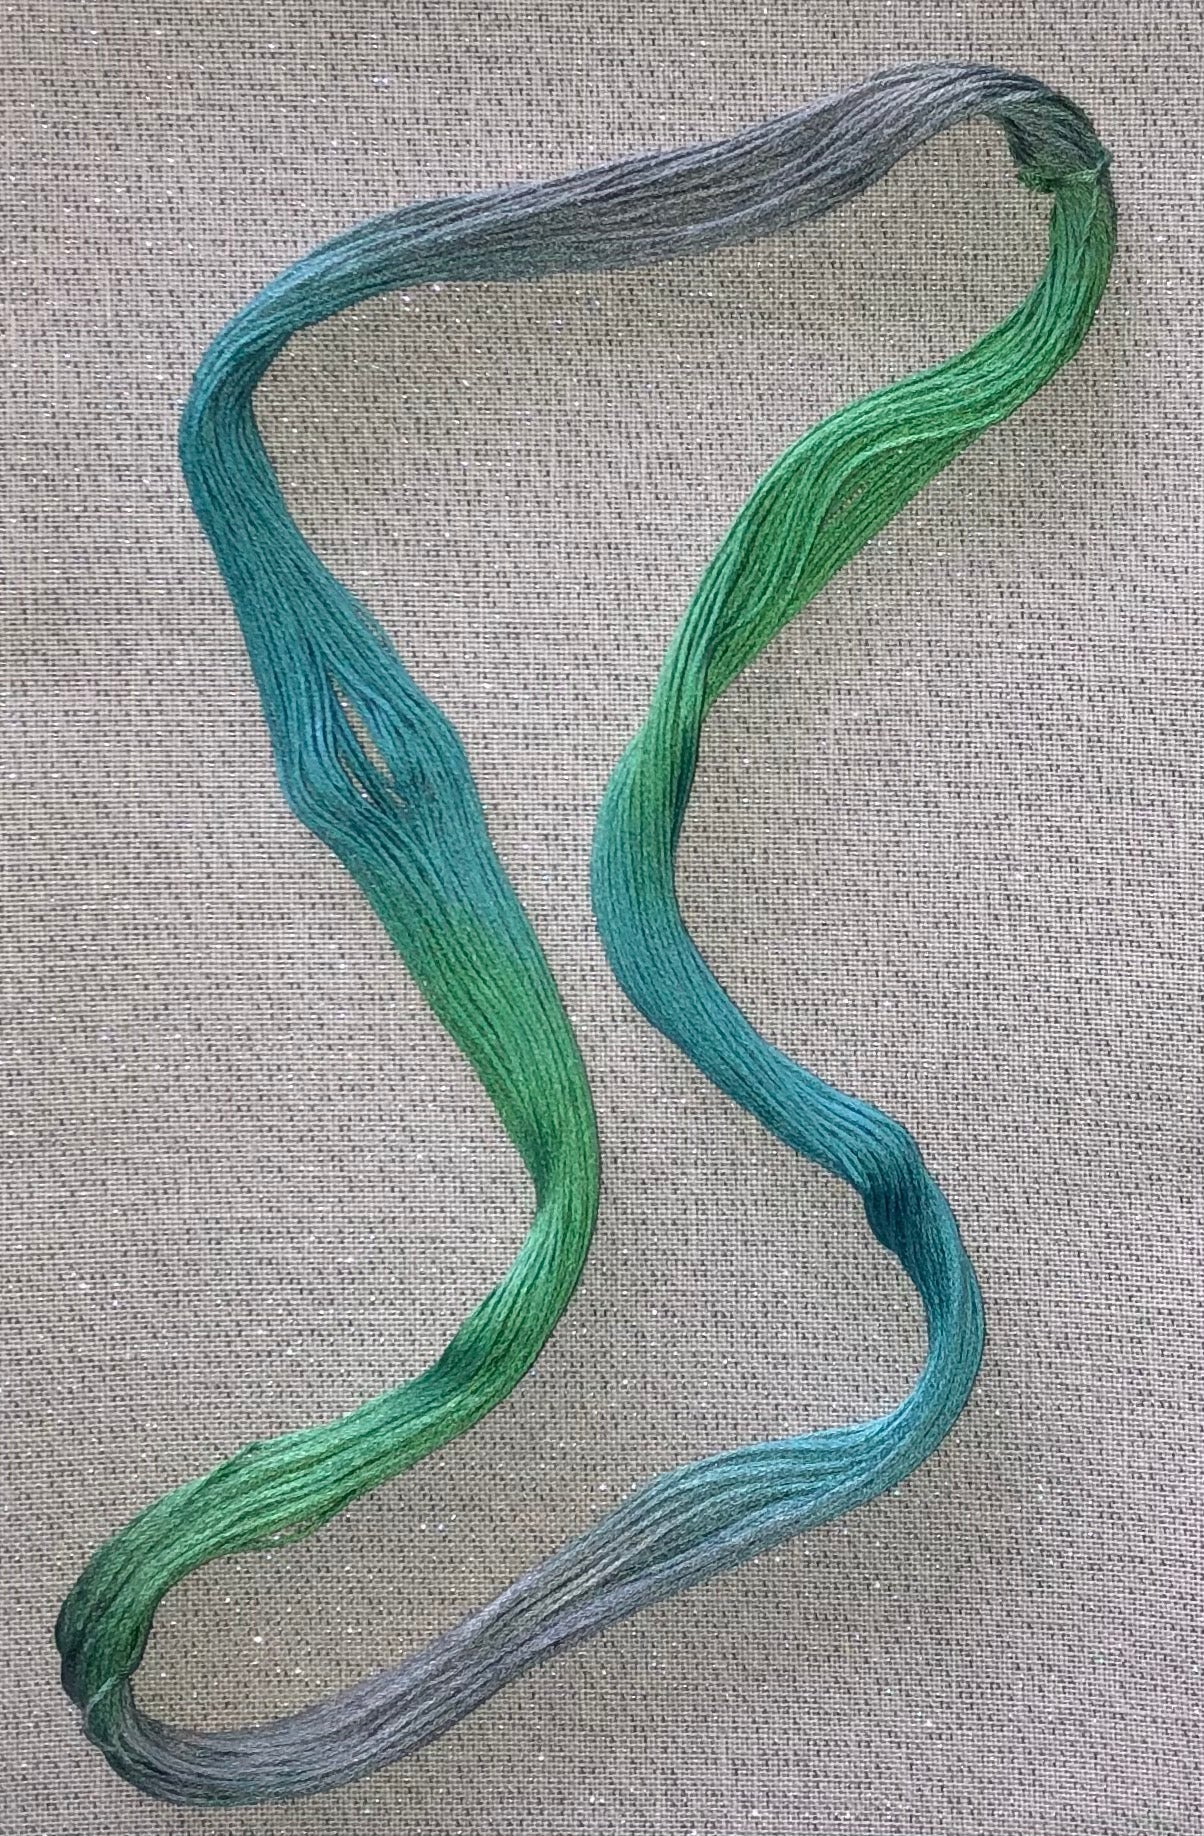 Silk hand dyed floss - Coastal - Dyeing for Cross Stitch